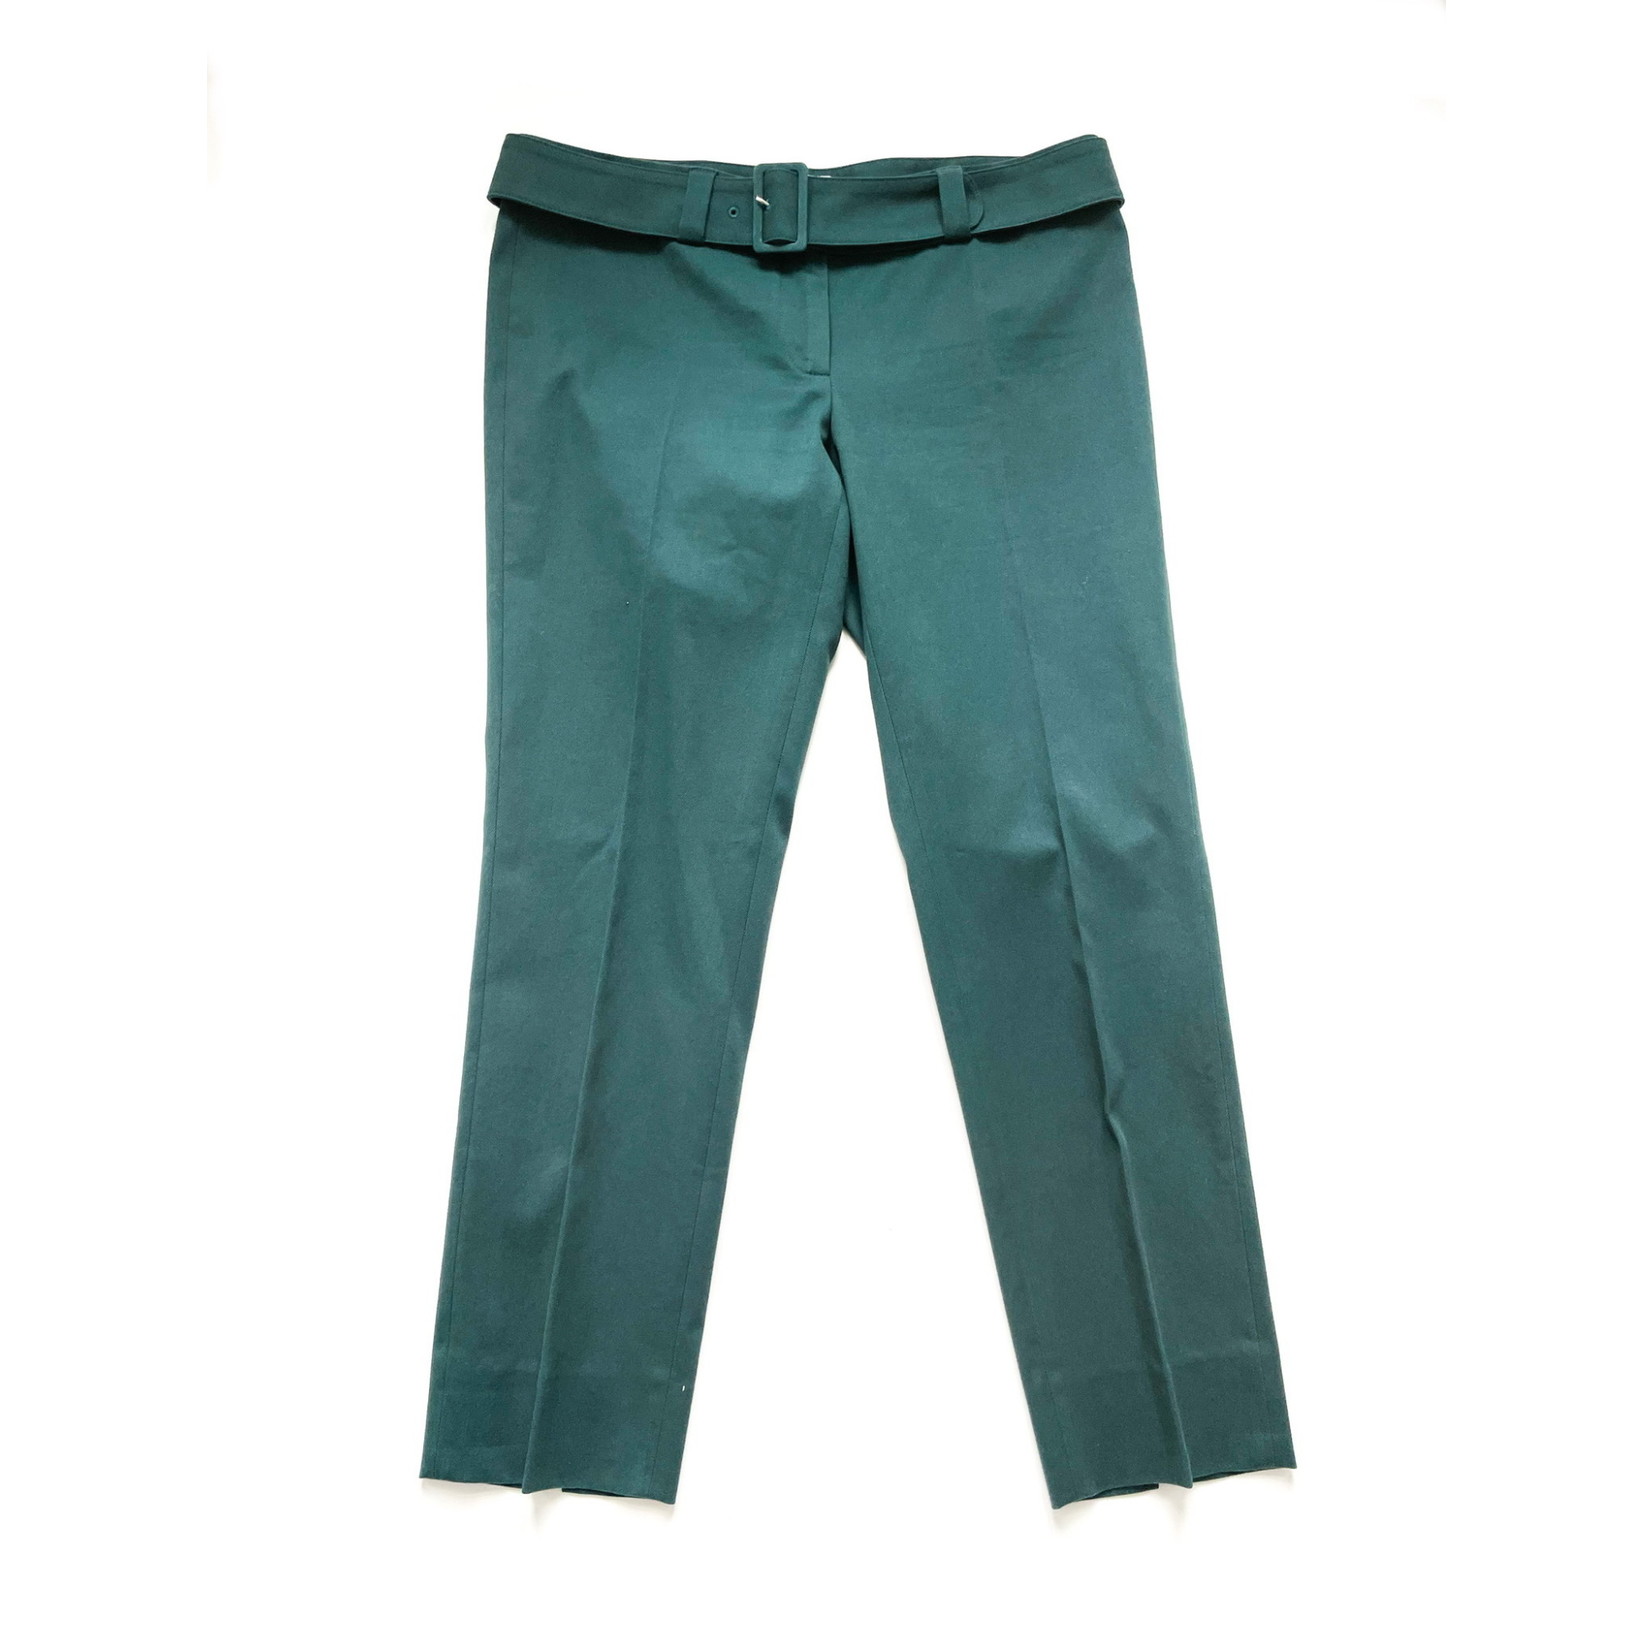 Alberto Biani Couture Alberto Biani Couture Green Trousers - Size 46/M